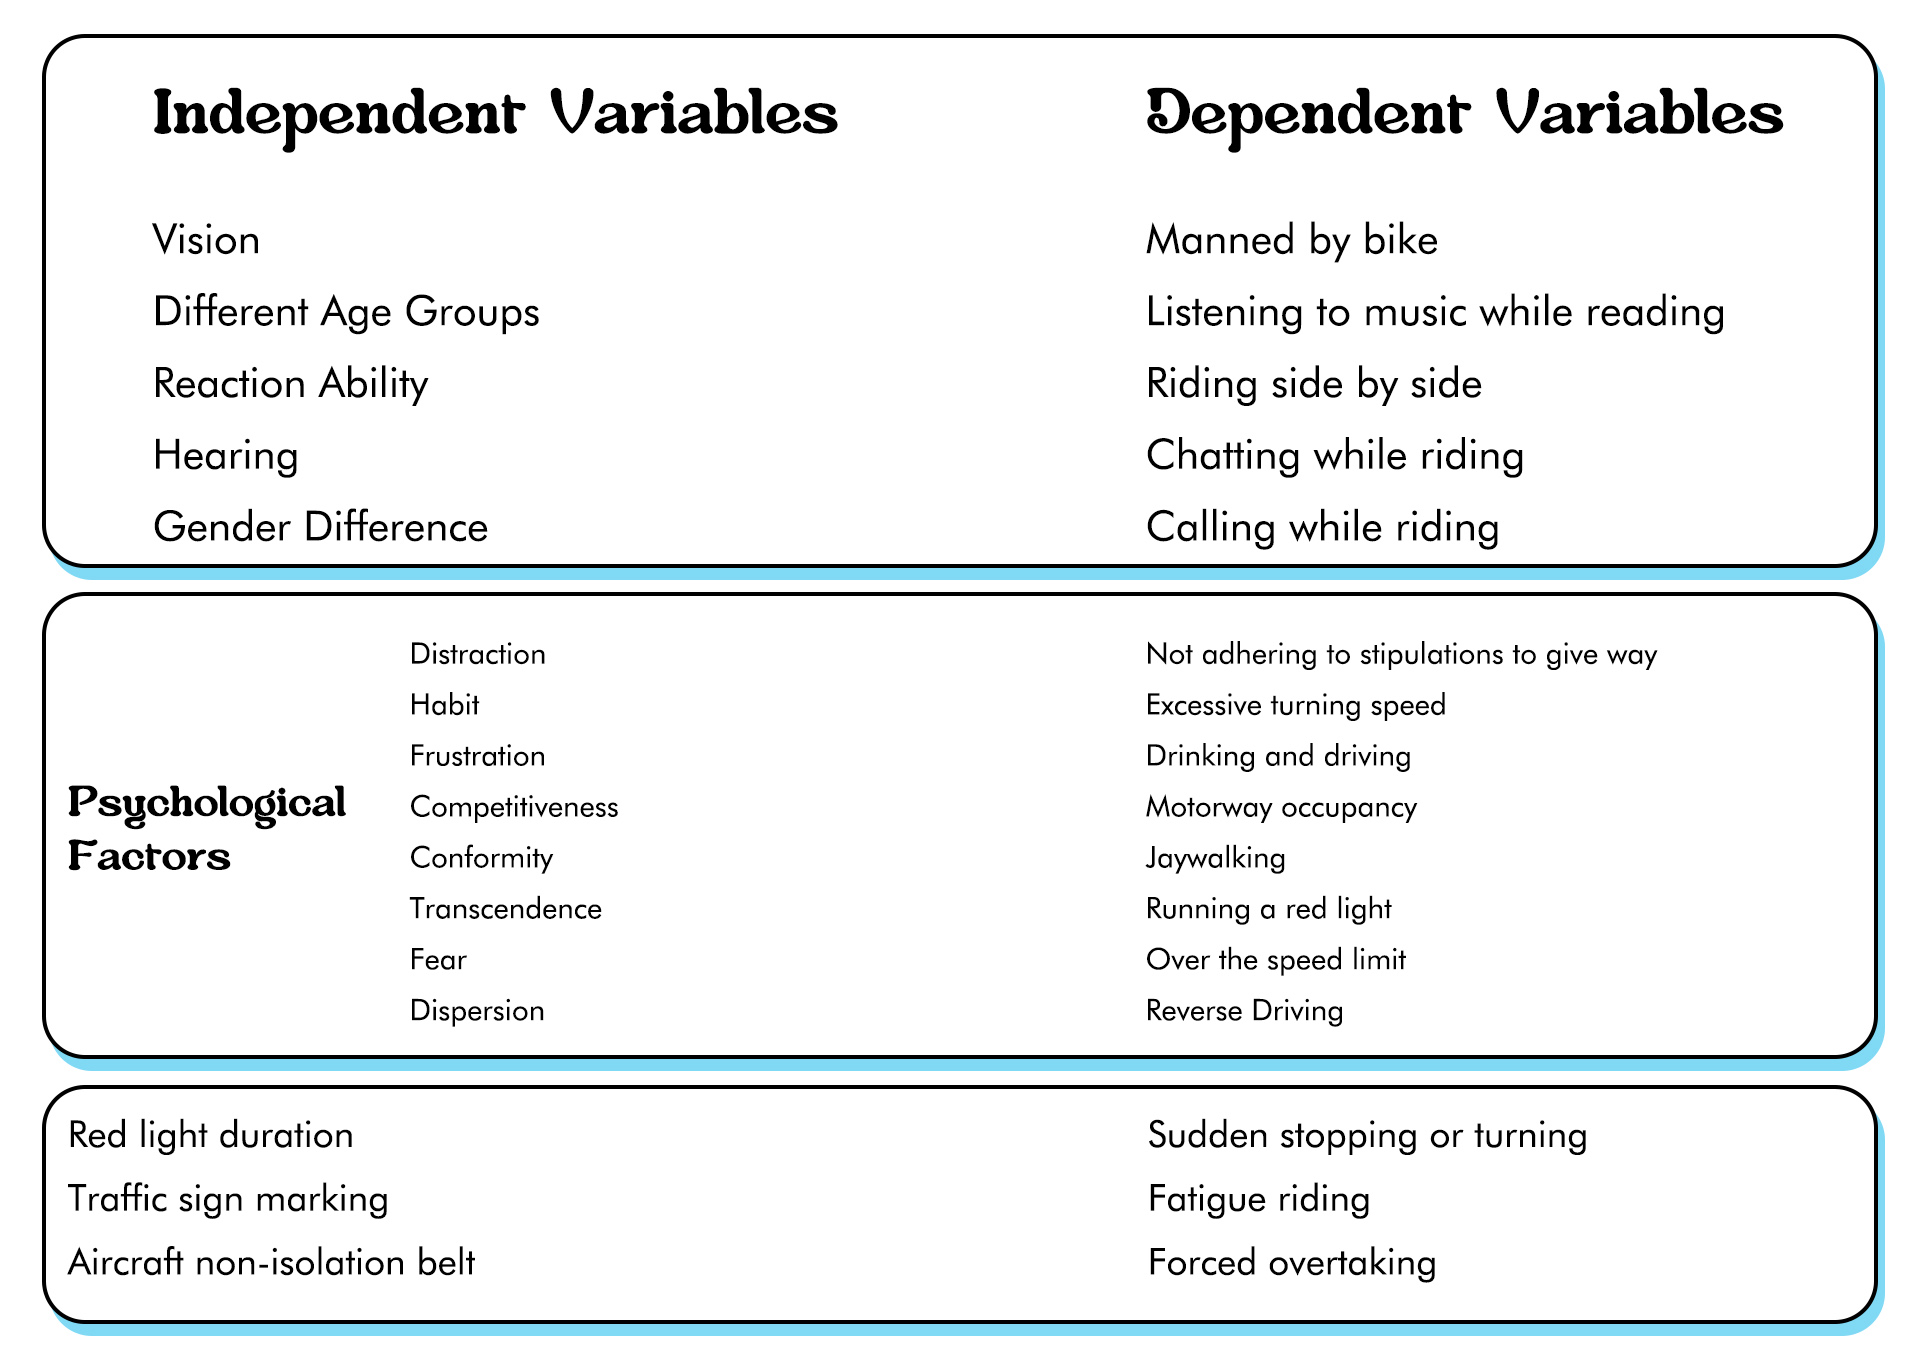 Independent and Dependent Variables Examples Image